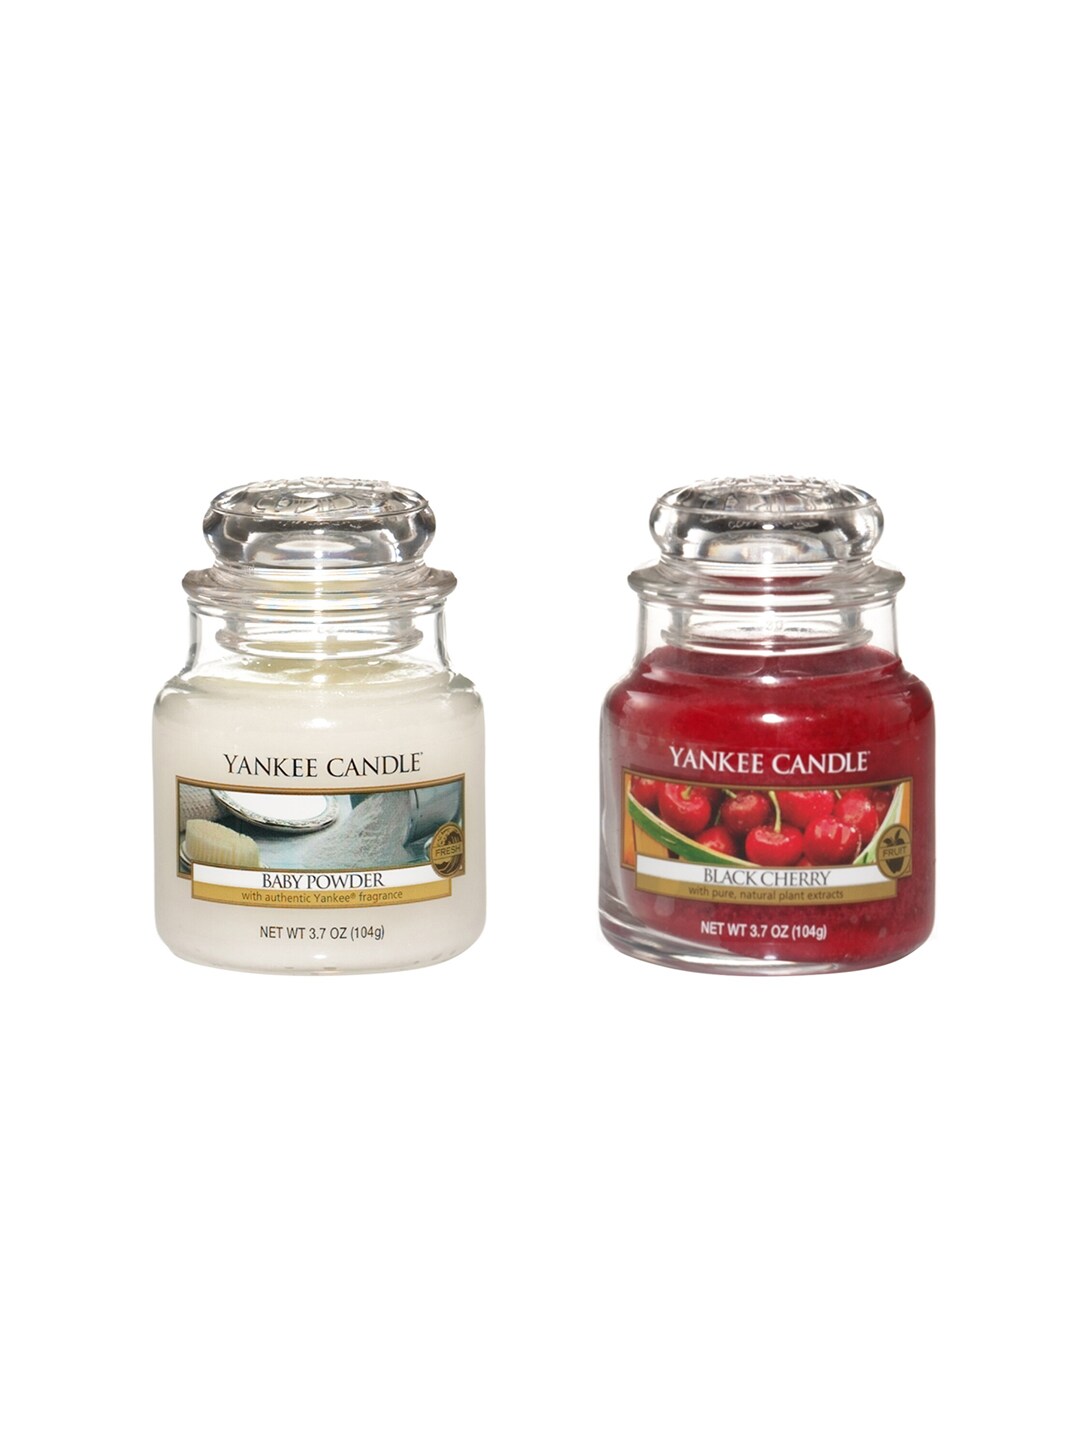 YANKEE CANDLE Set of 2 White & Red Classic Jar Baby Powder & Cherry Scented Candles Price in India